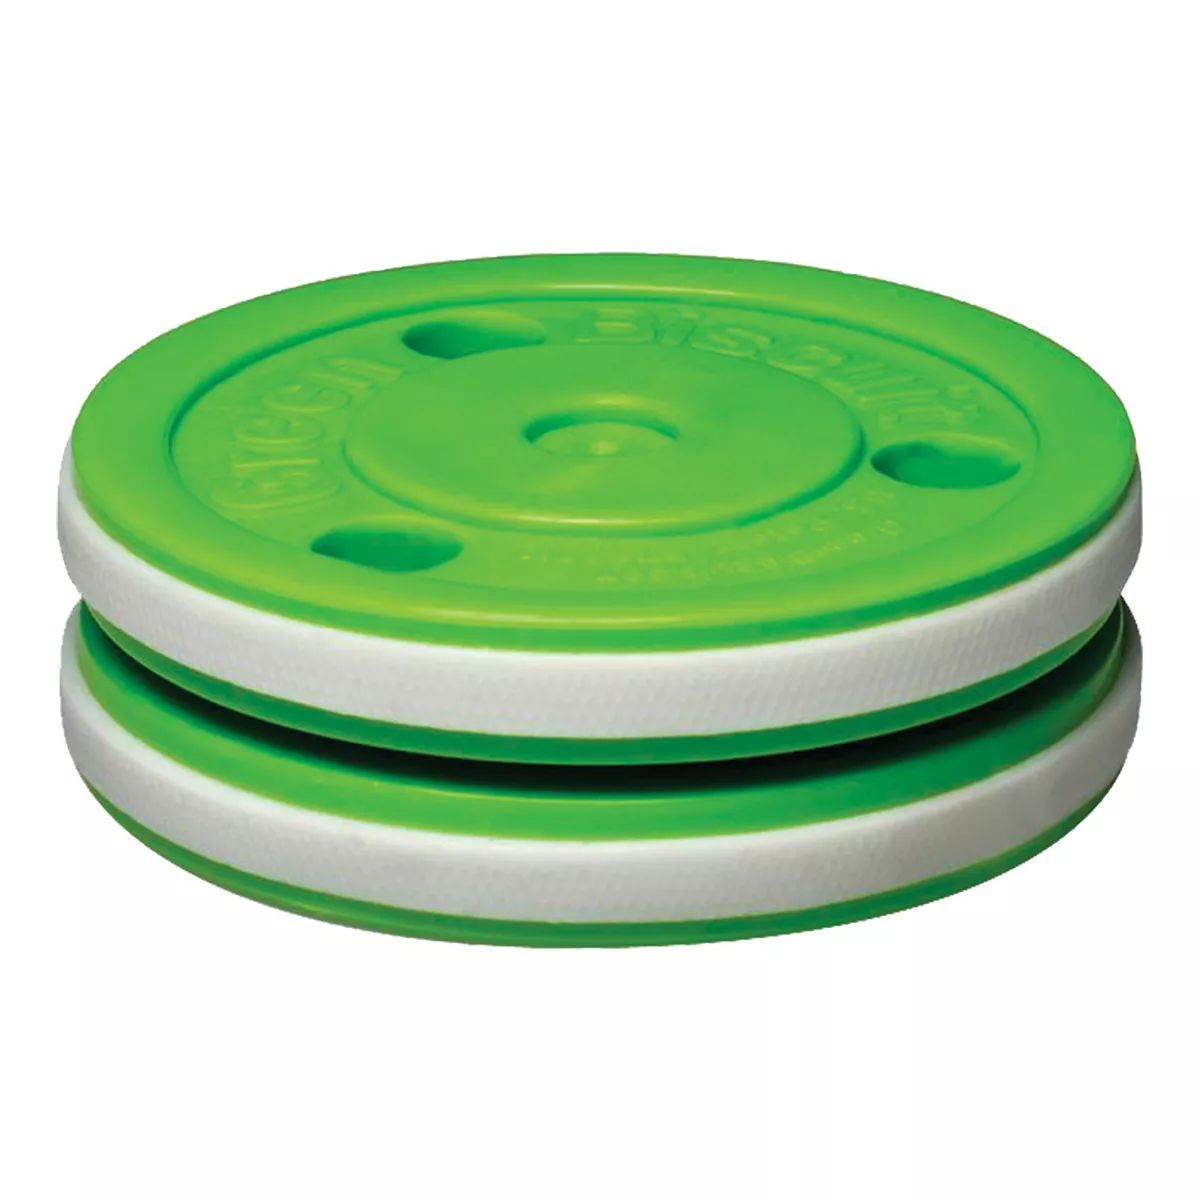 Image of Green Biscuit Pro Training Puck